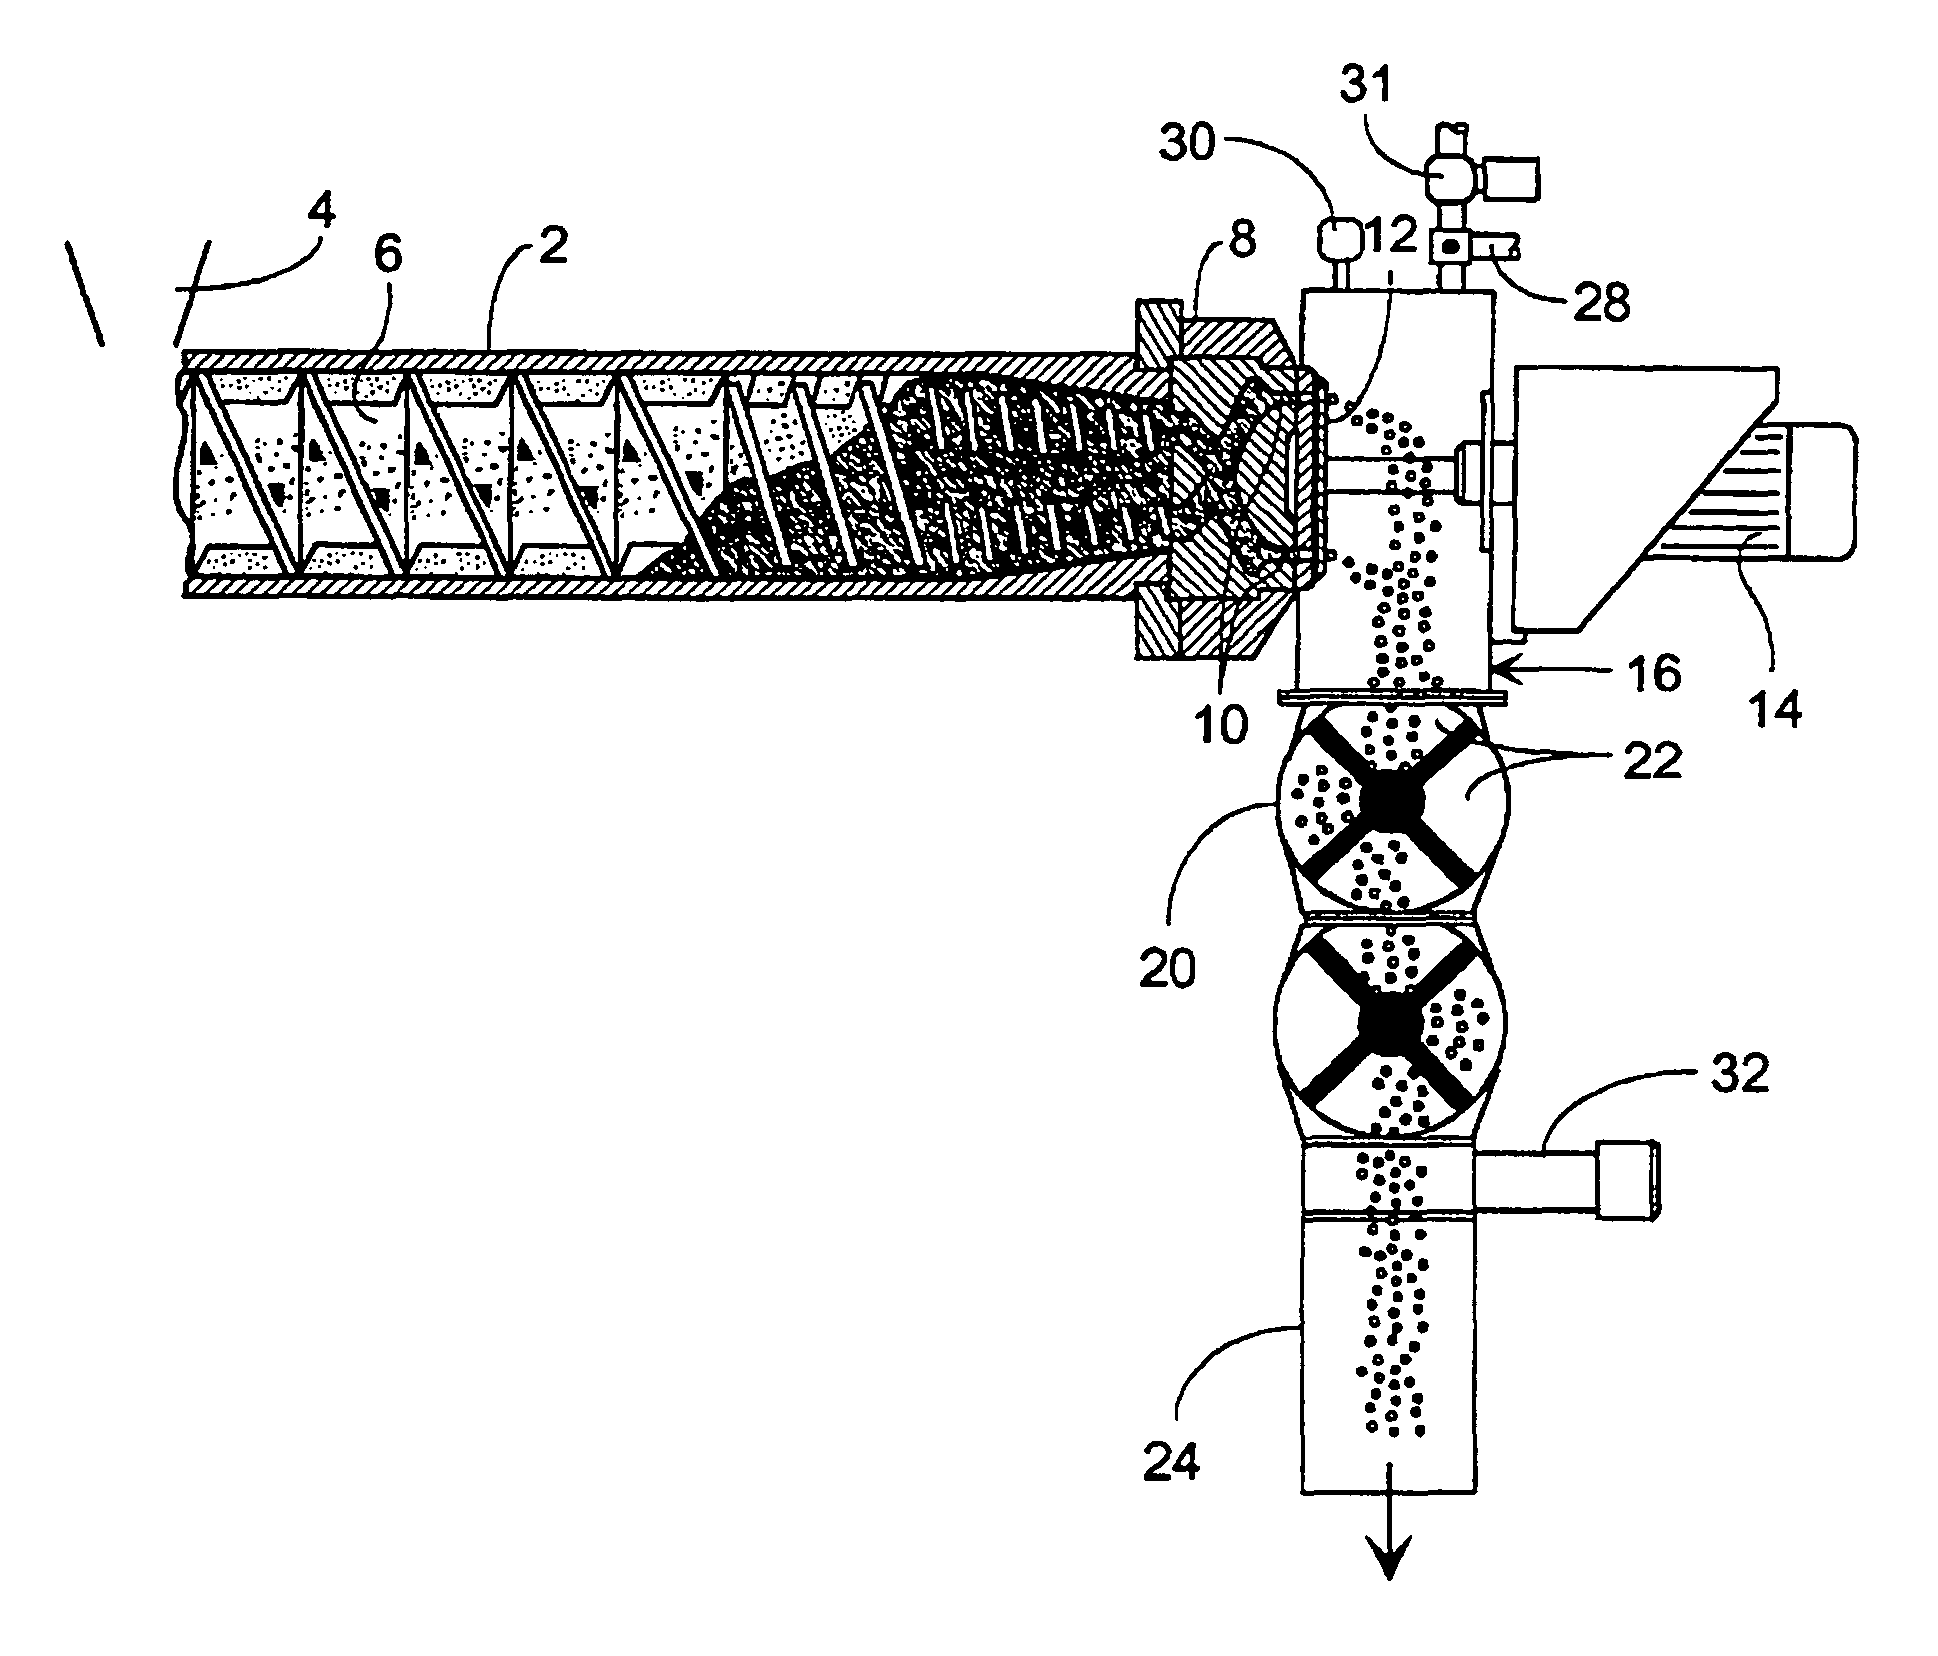 Method and apparatus for extrusion of expanding water holding products such as foodstuff particles or feeding stuff pellets